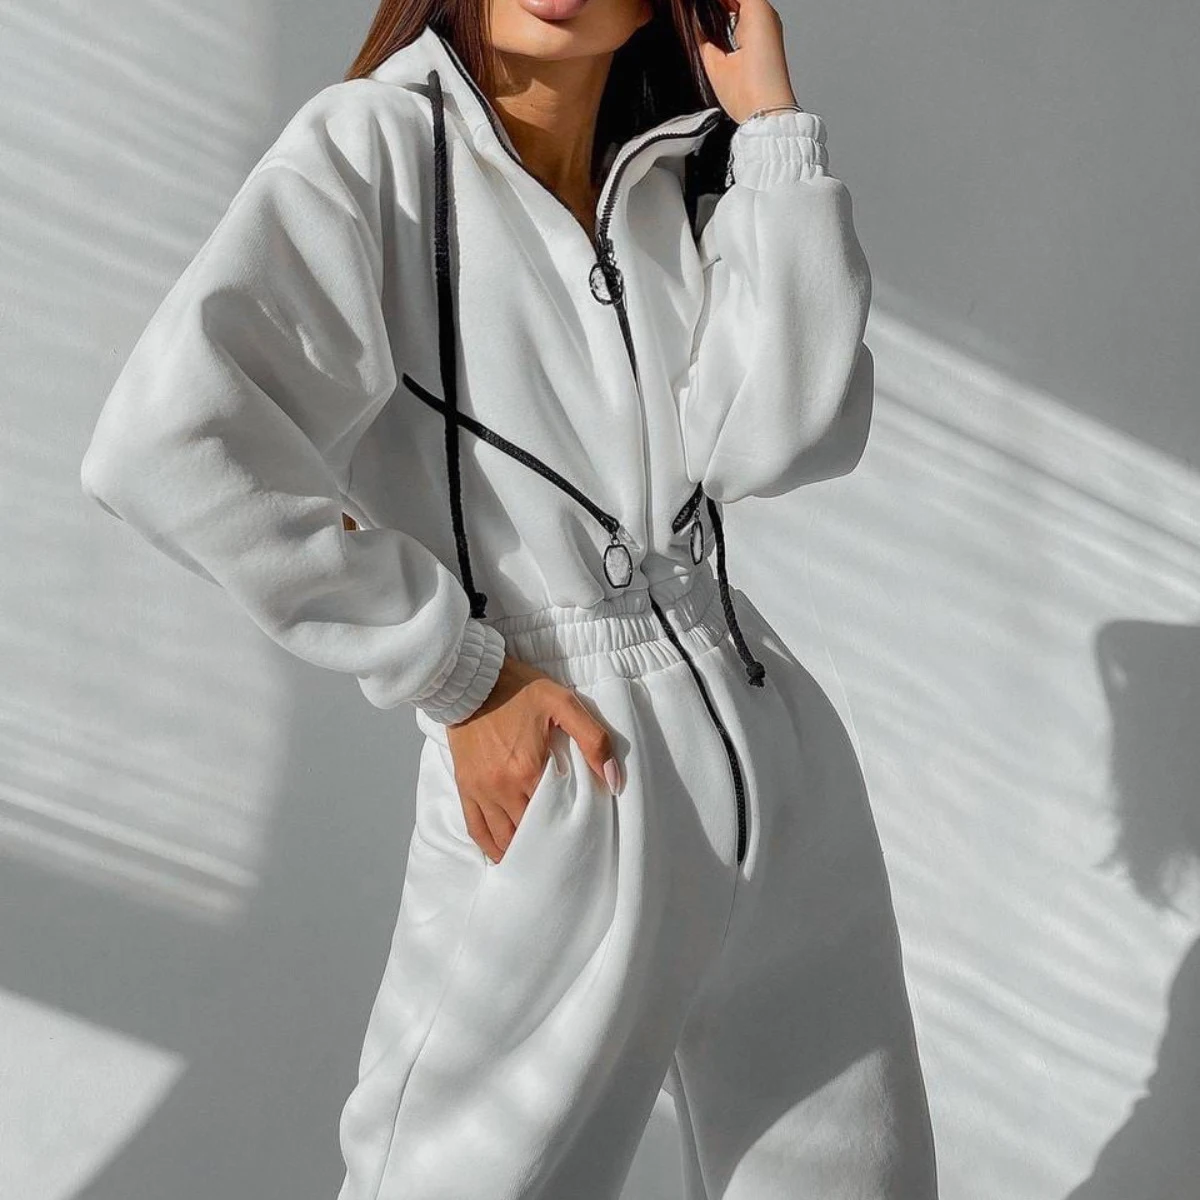 Winter Fashion Elegant Women Basic Hoodie Jumpsuit Solid Hooded Jumpsuits Female Casual High Street Tracksuits One Piece Outfit